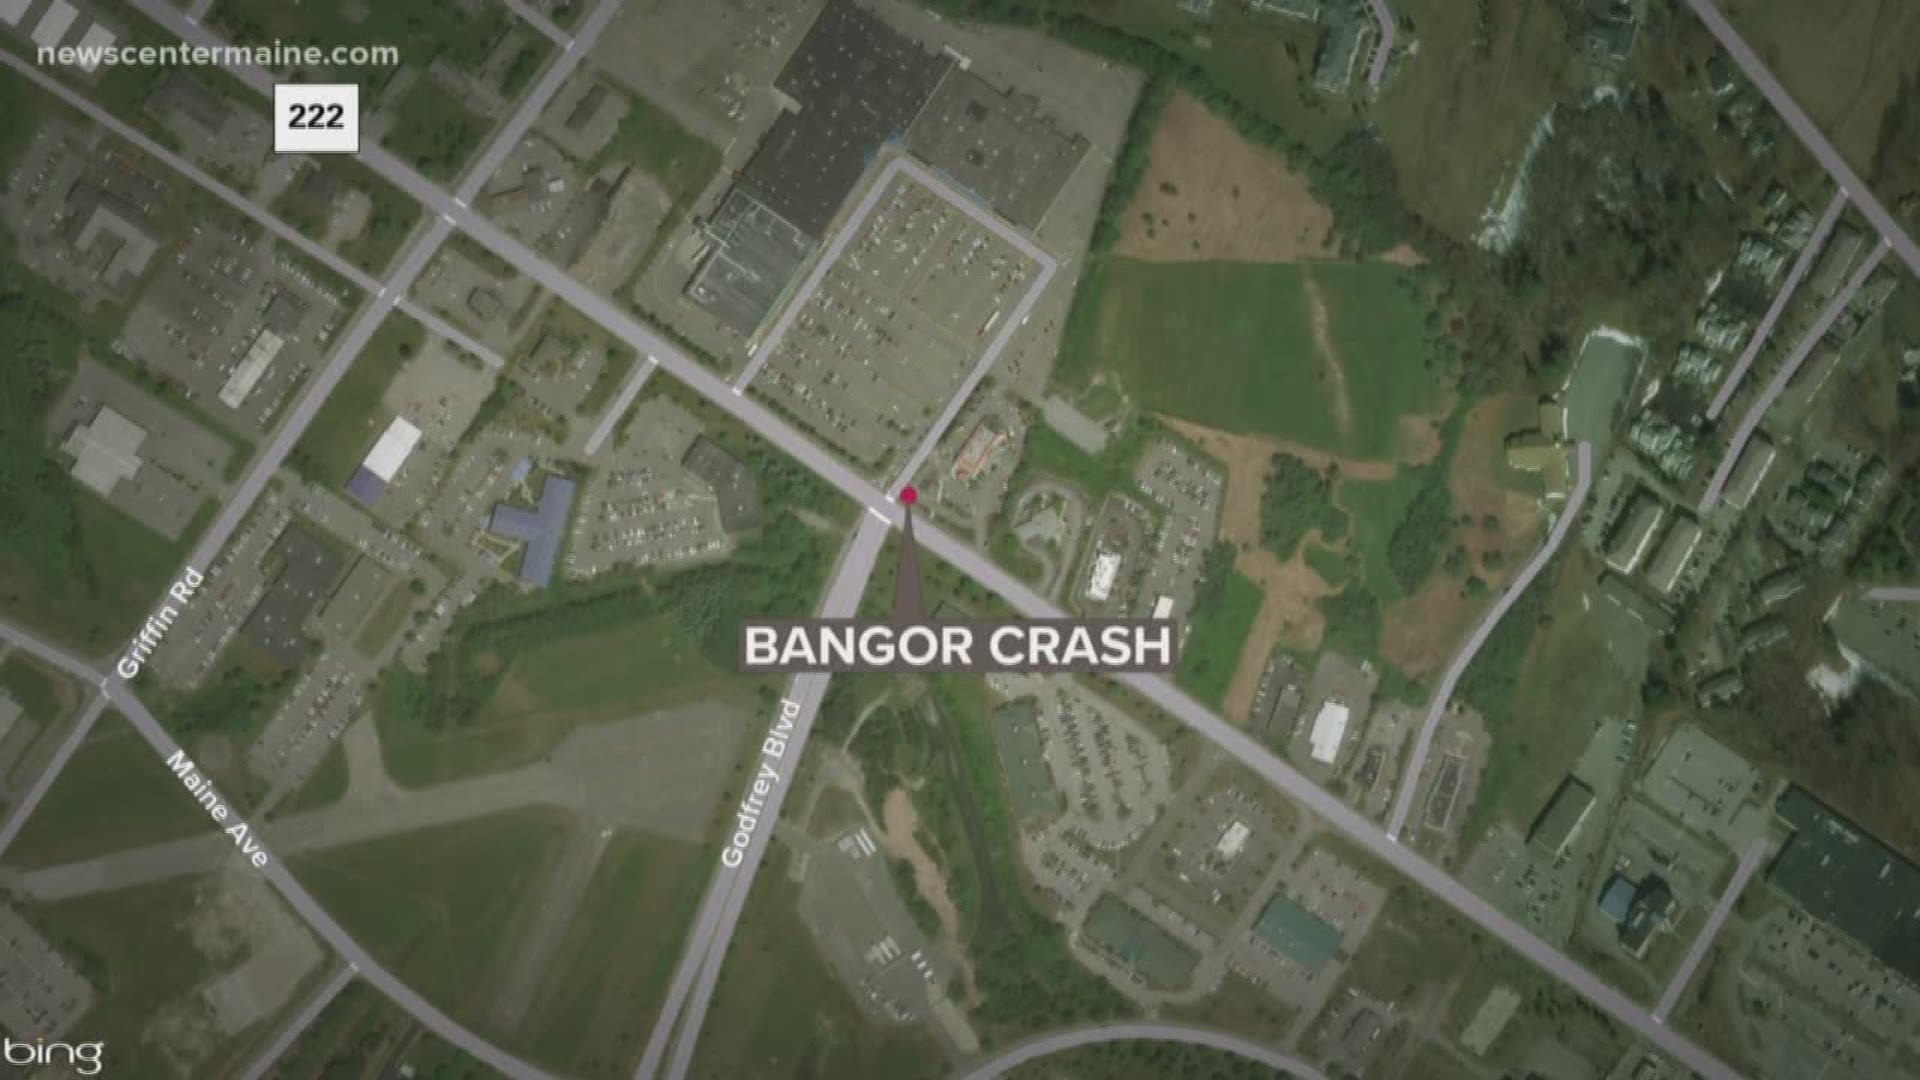 A motorcyclist is dead and the passenger has life-threatening injuries after colliding with a car at the intersection of Union Street and Godfrey Boulevard in Bangor Monday night. No one in the car was hurt.